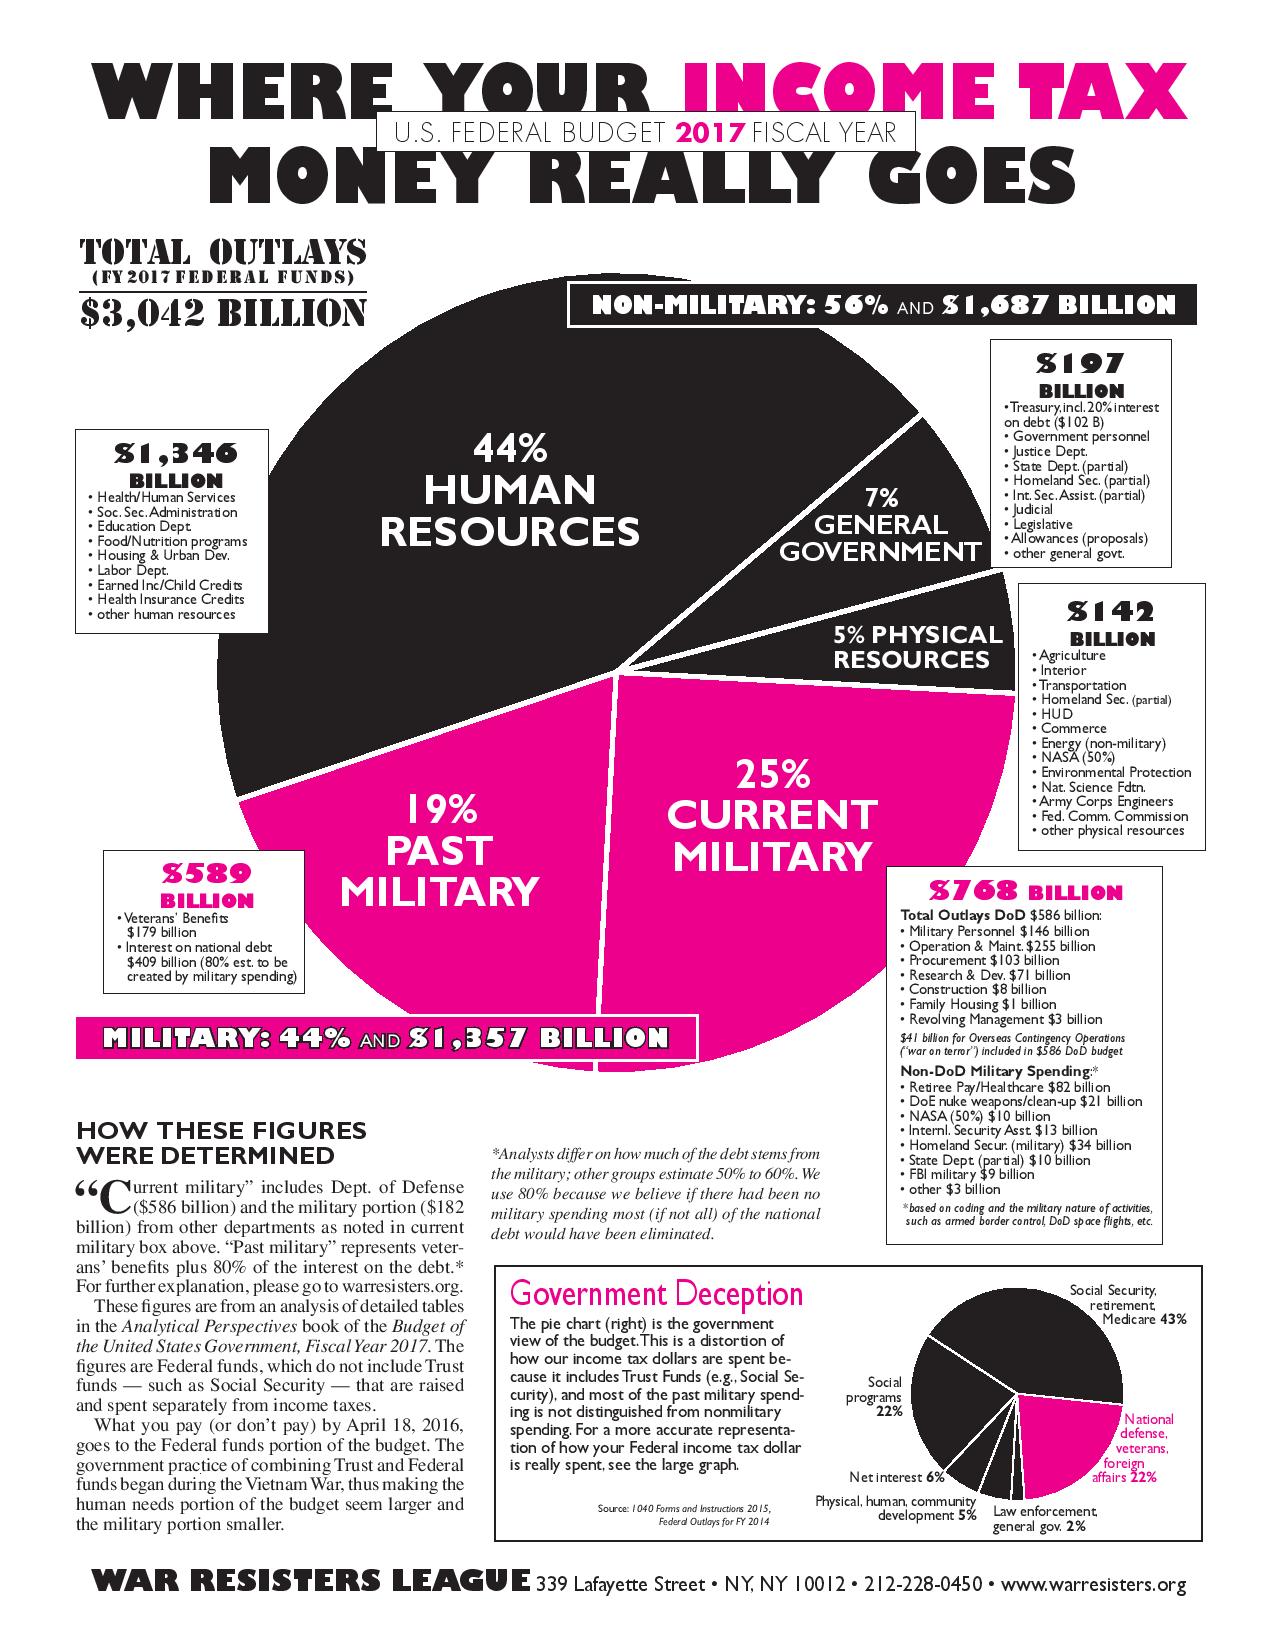 where-your-income-tax-money-really-goes-wrl-pie-chart-flyer-fy2017